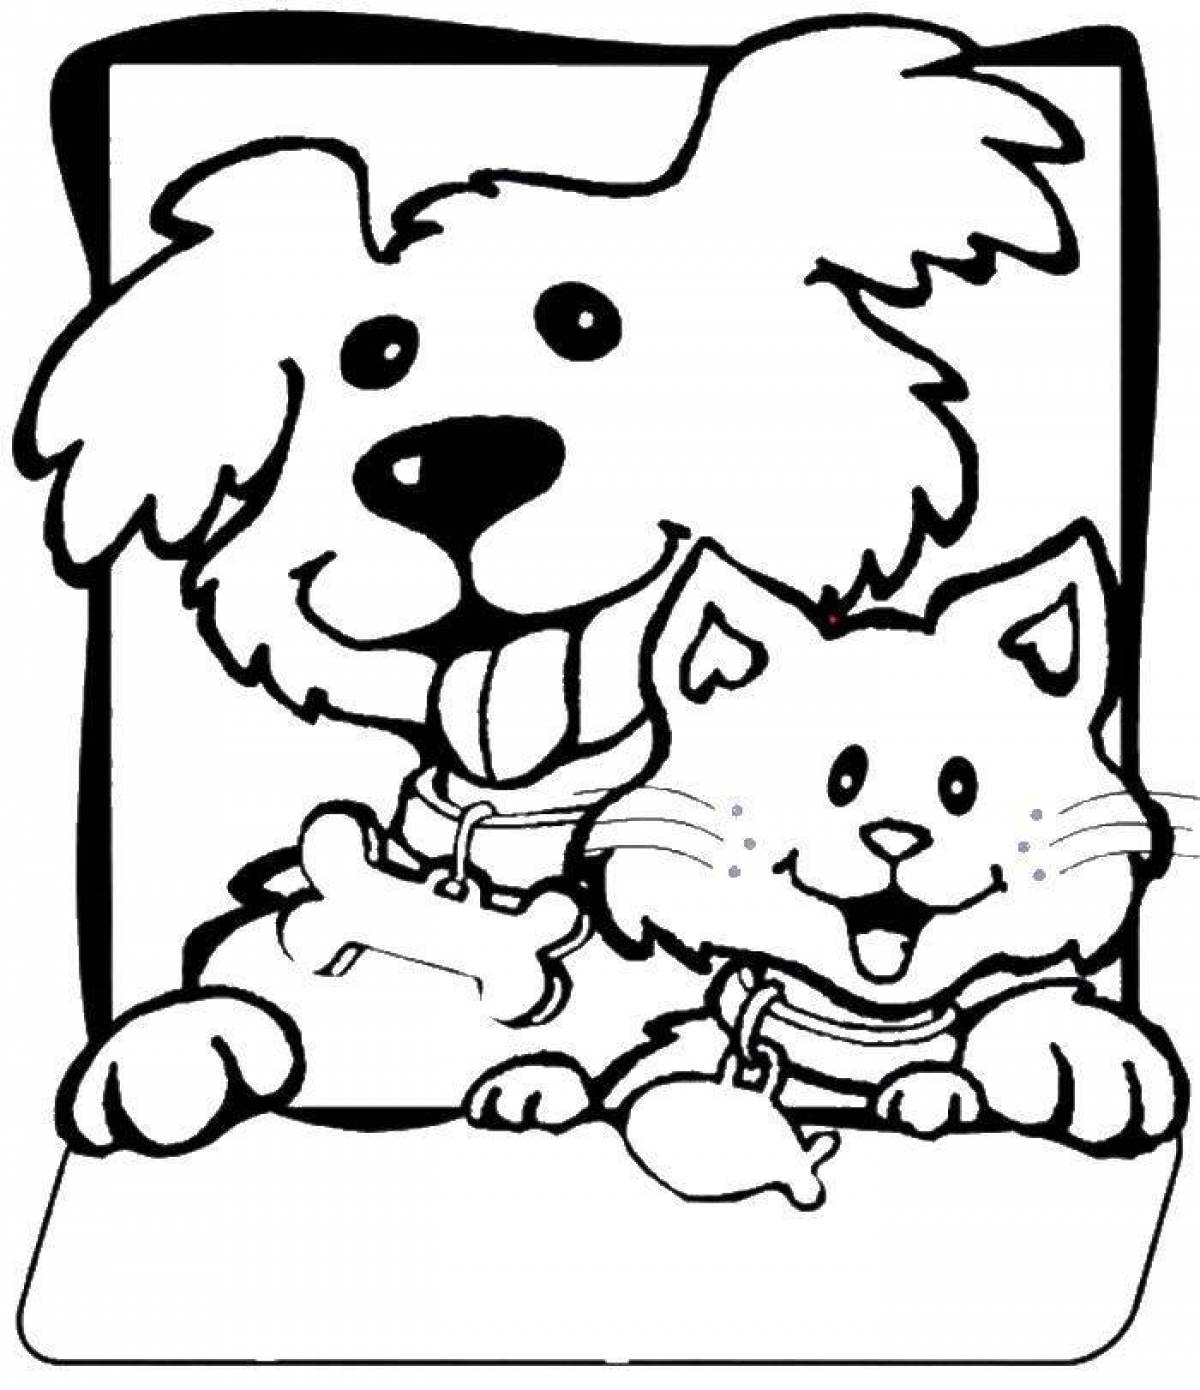 Doggie kitties friendly coloring book for kids